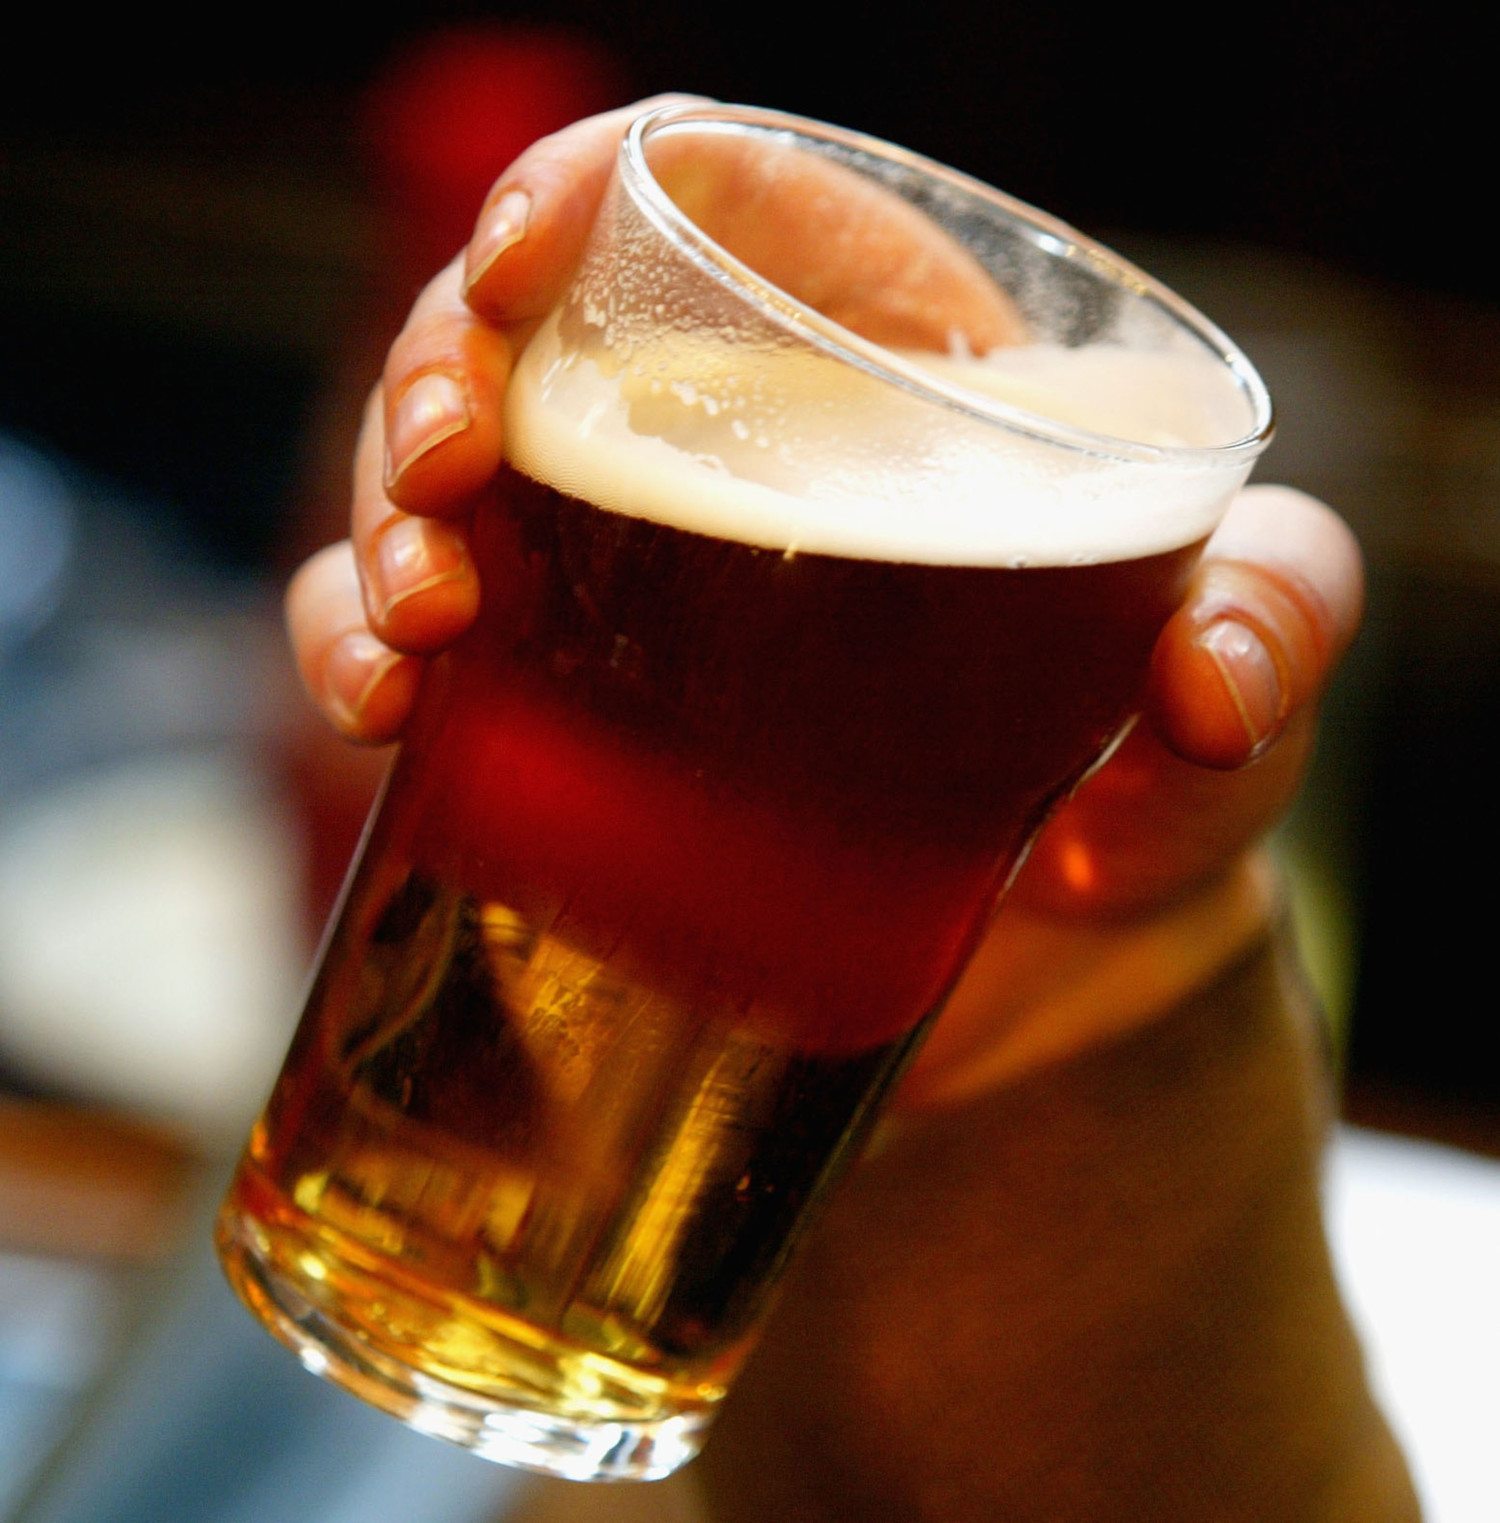 Beer Price Rise Threatens Pubs